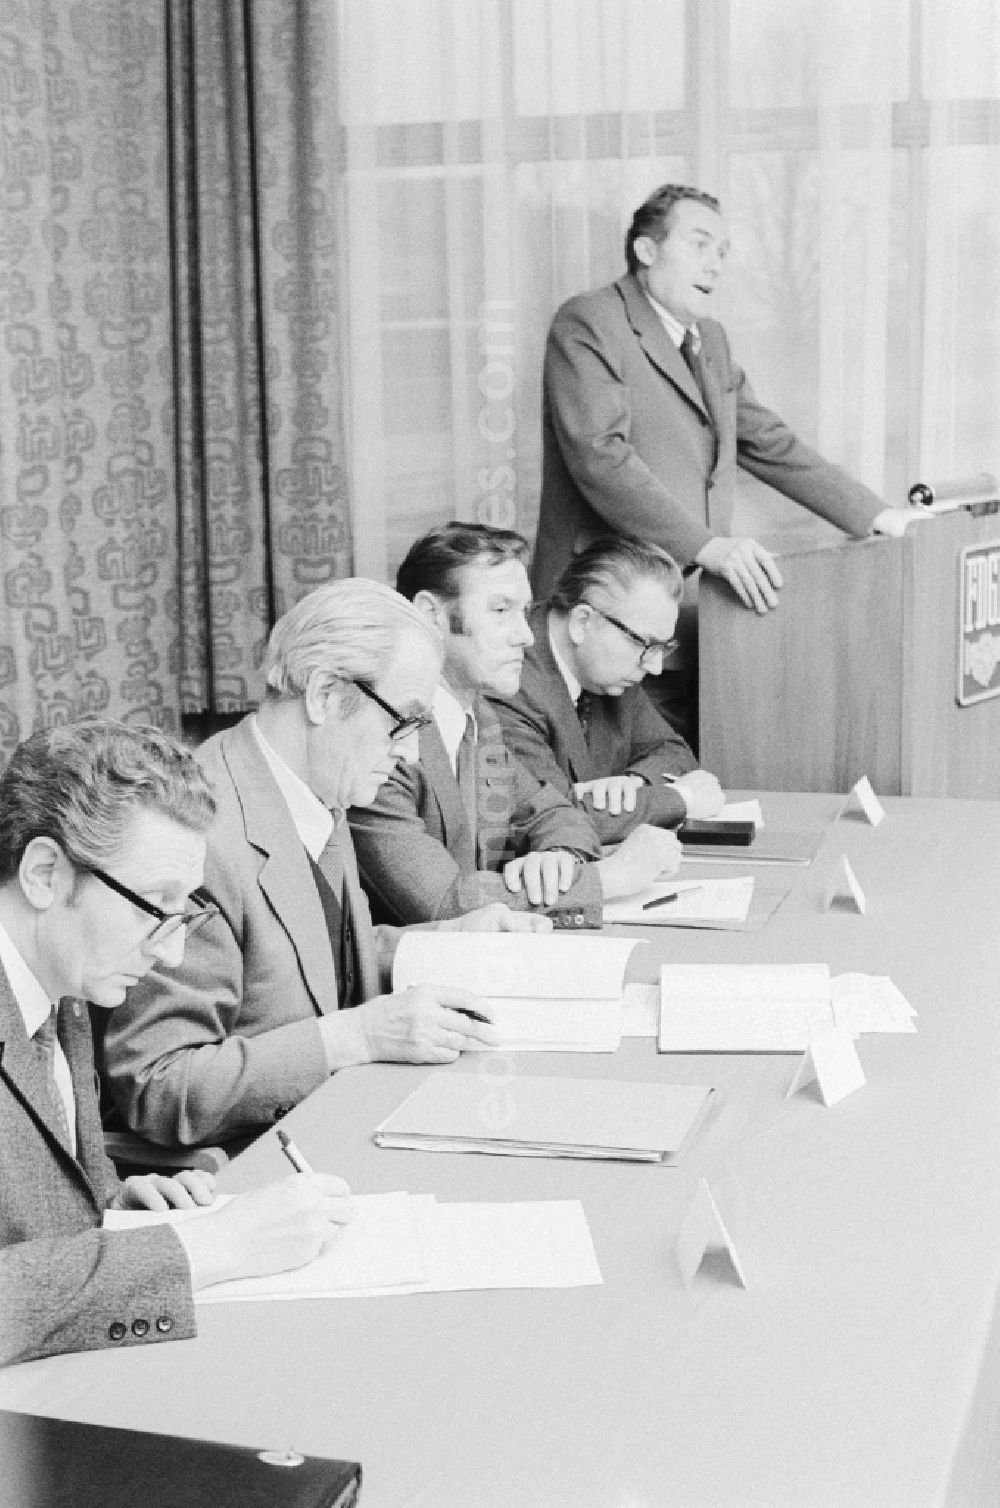 GDR image archive: Berlin - Meeting in the Academy of Sciences in Berlin, the former capital of the GDR, the German Democratic Republic